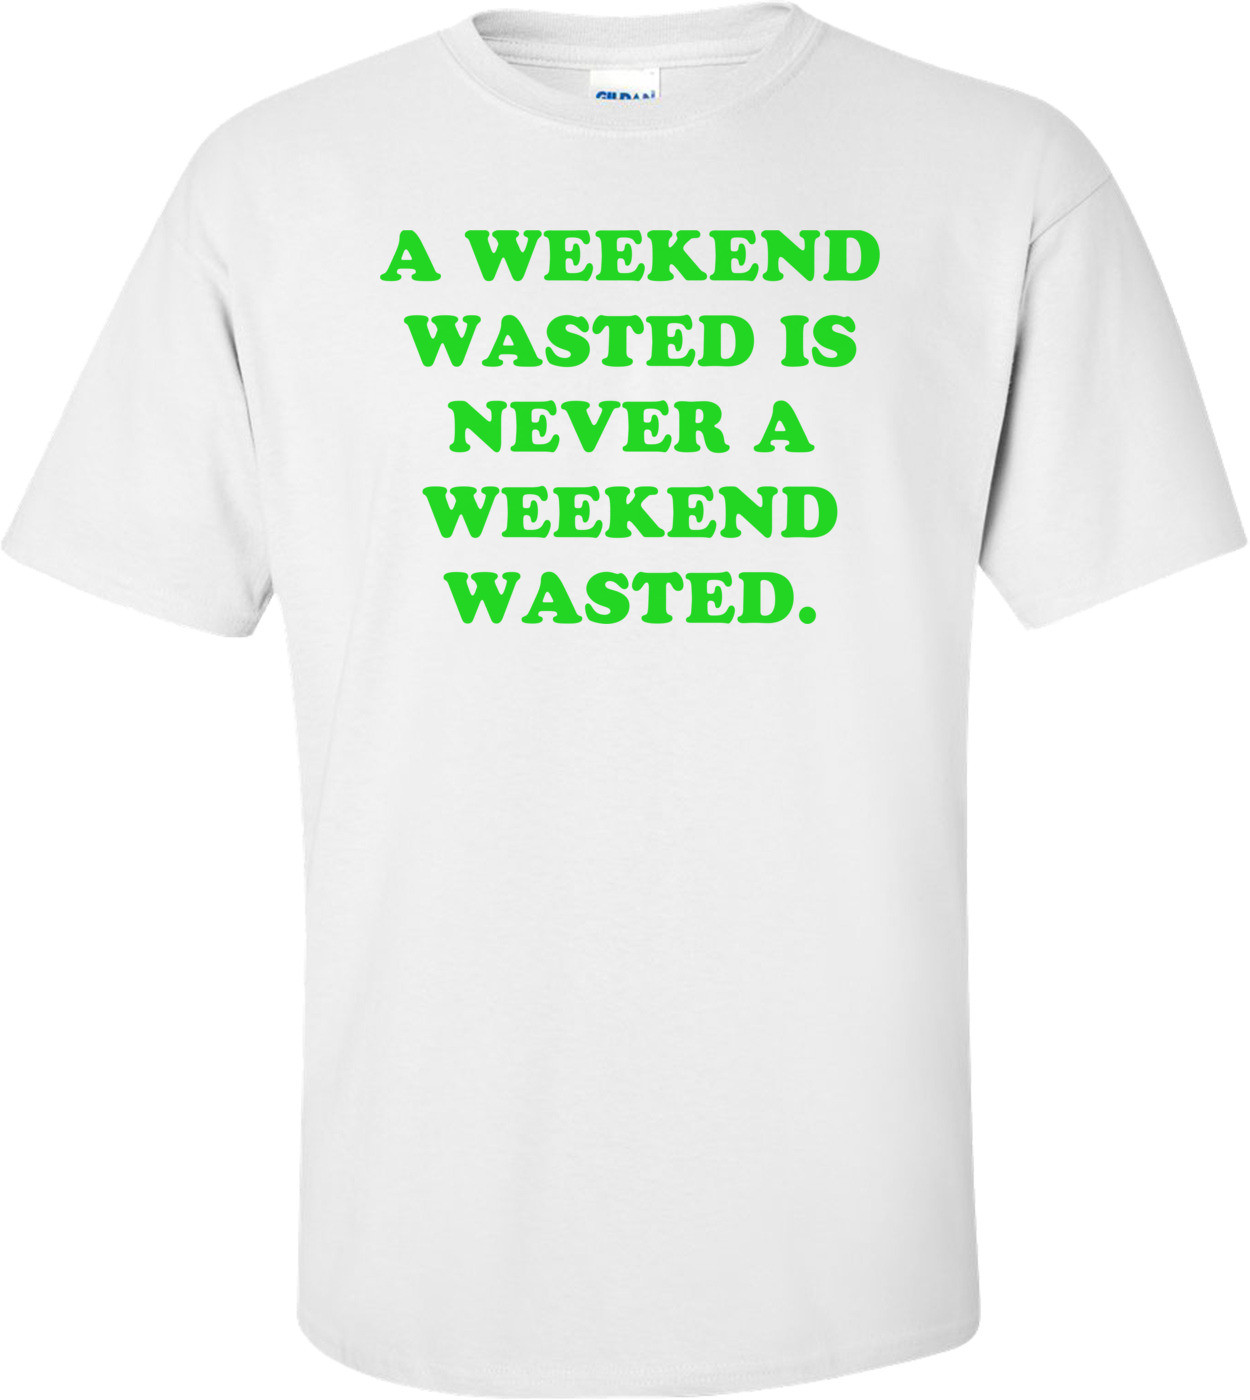 A WEEKEND WASTED IS NEVER A WEEKEND WASTED.